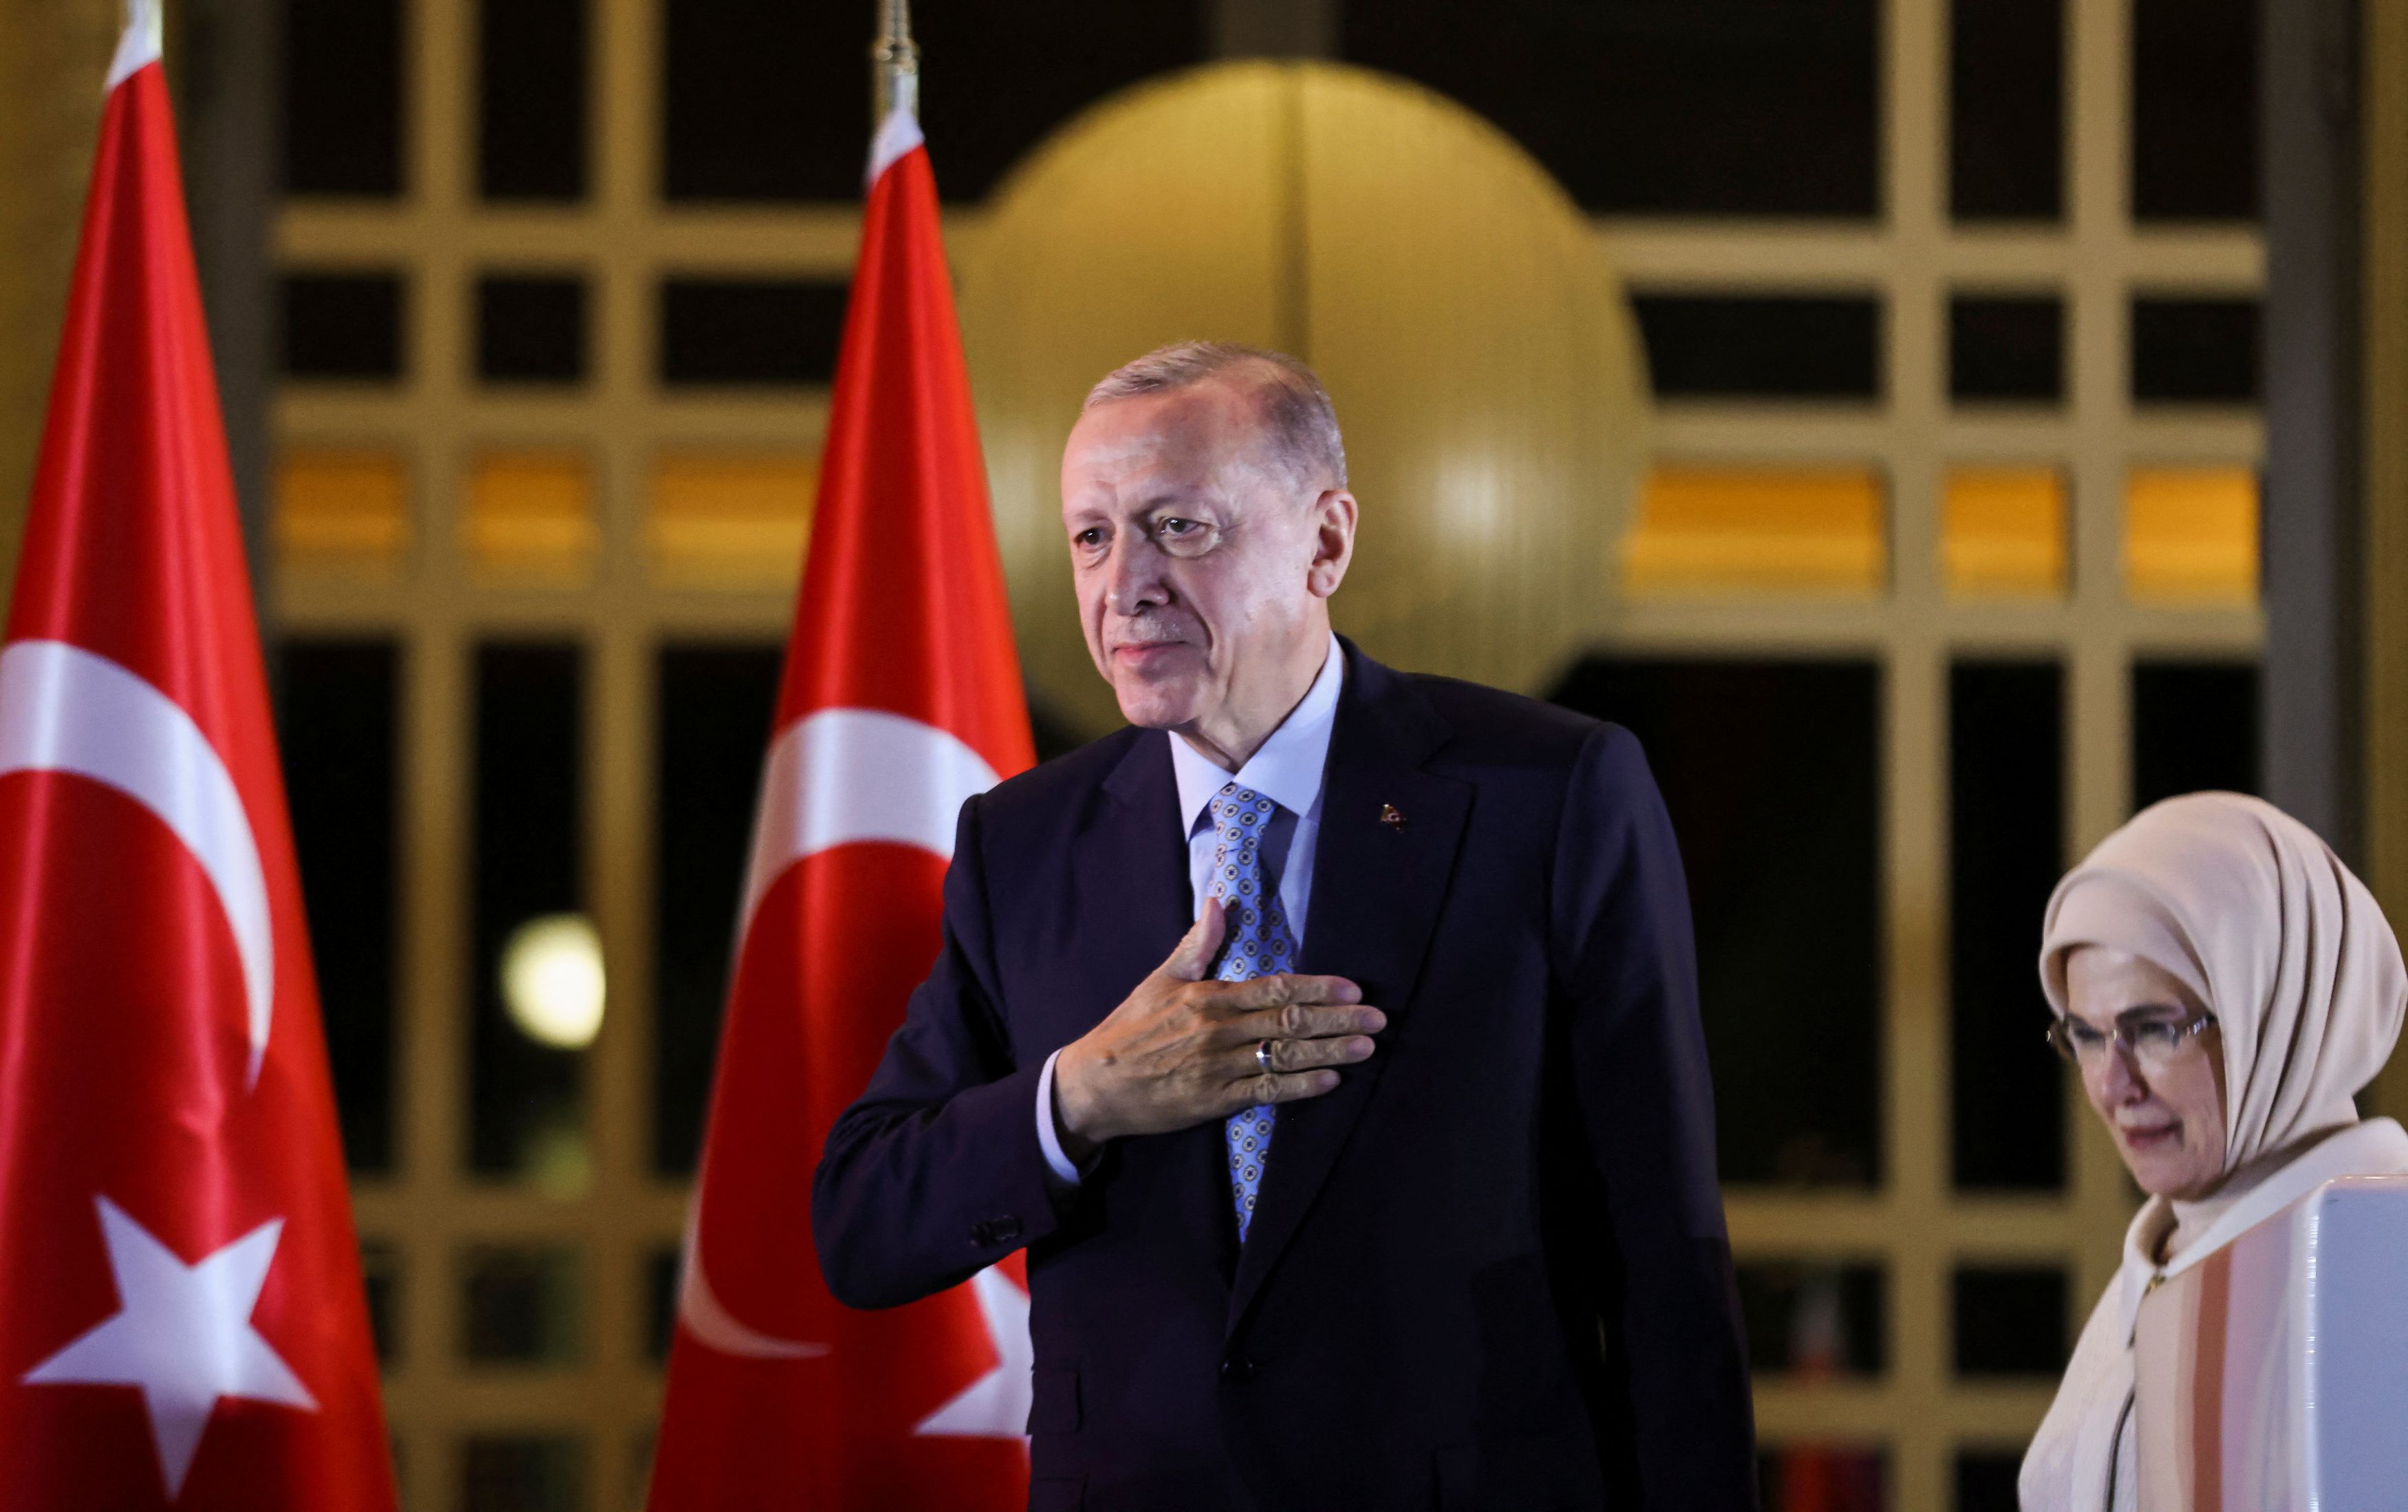 Erdogan: This is his property – in the public places where he belongs